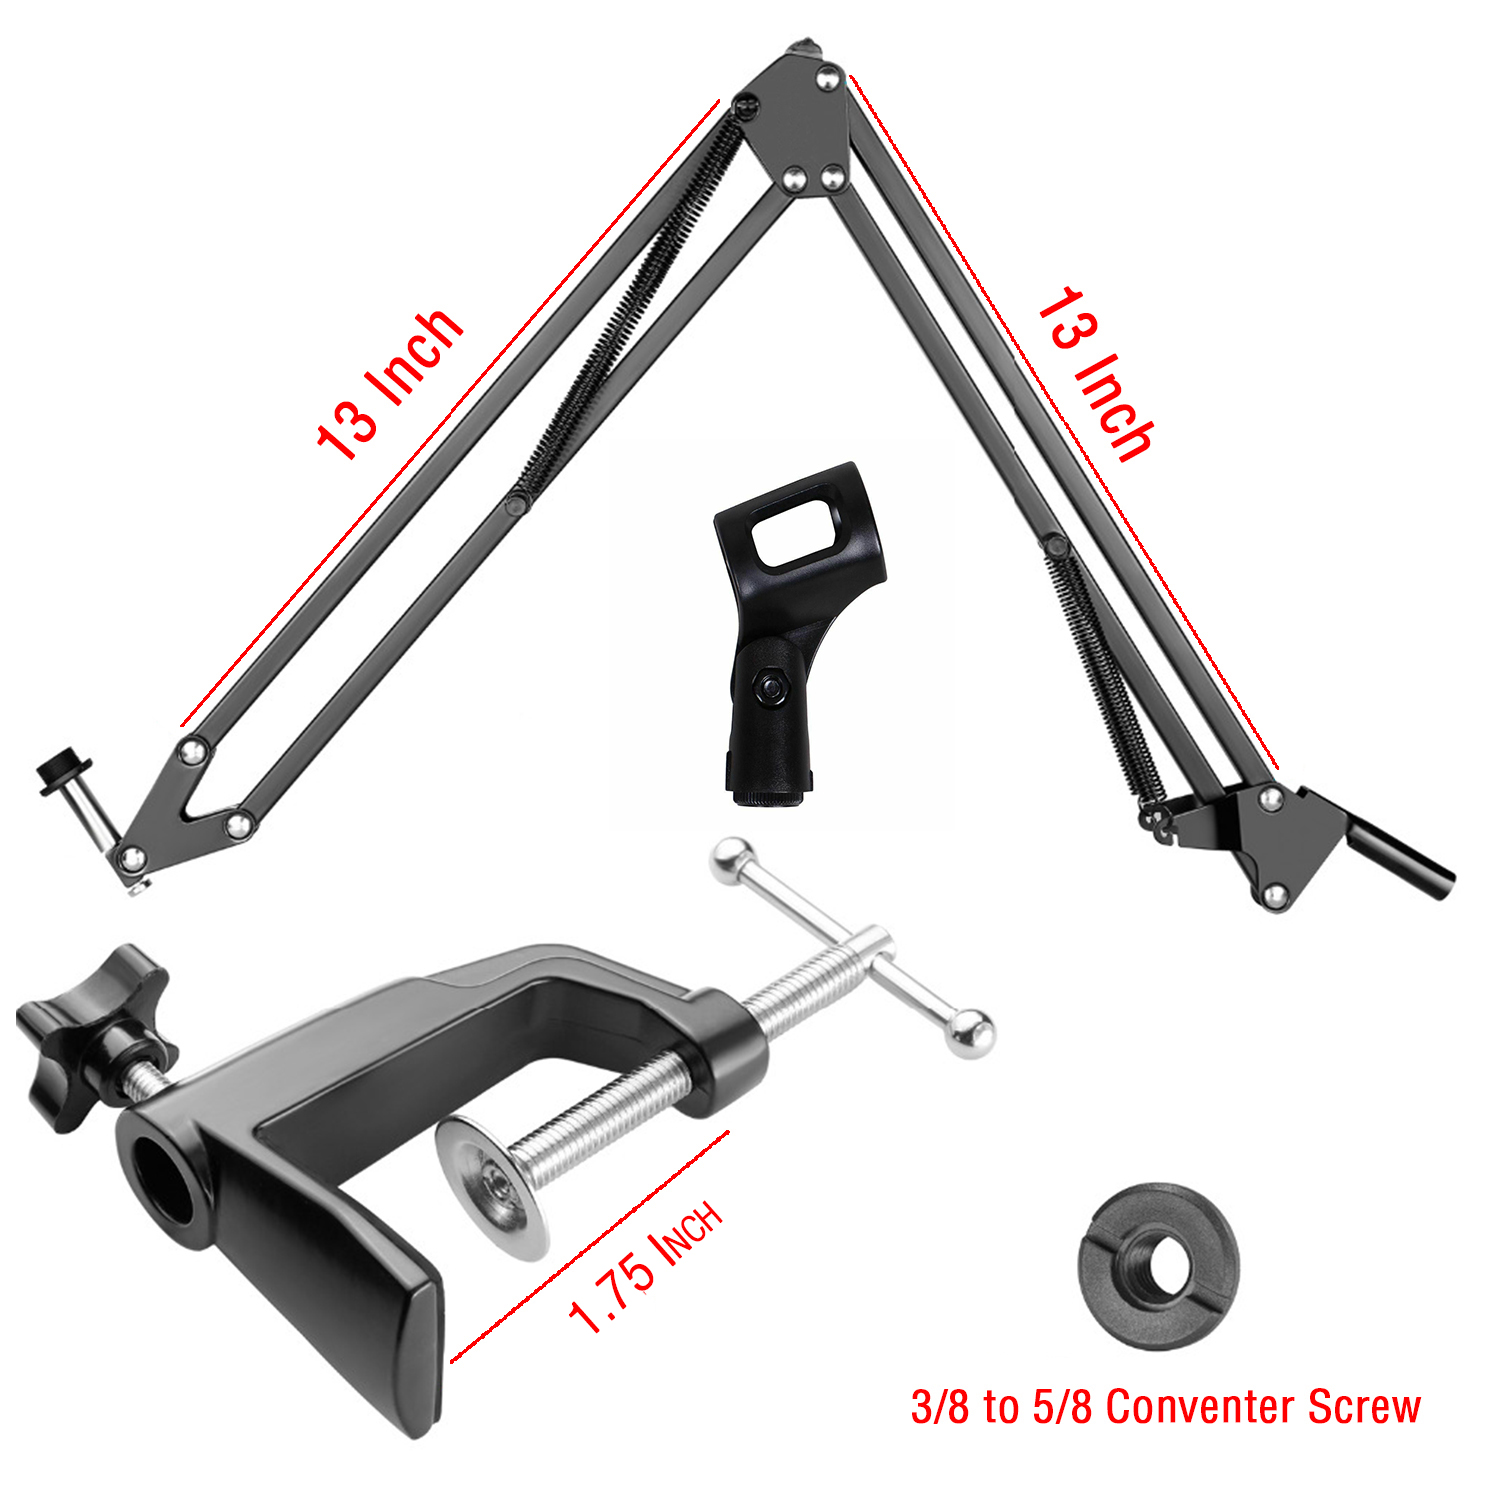 Boytone BT-30ST Adjustable Microphone Arm Suspension Boom Scissor Arm Stand, with 3/8\" to 5/8\" Screw Adapter